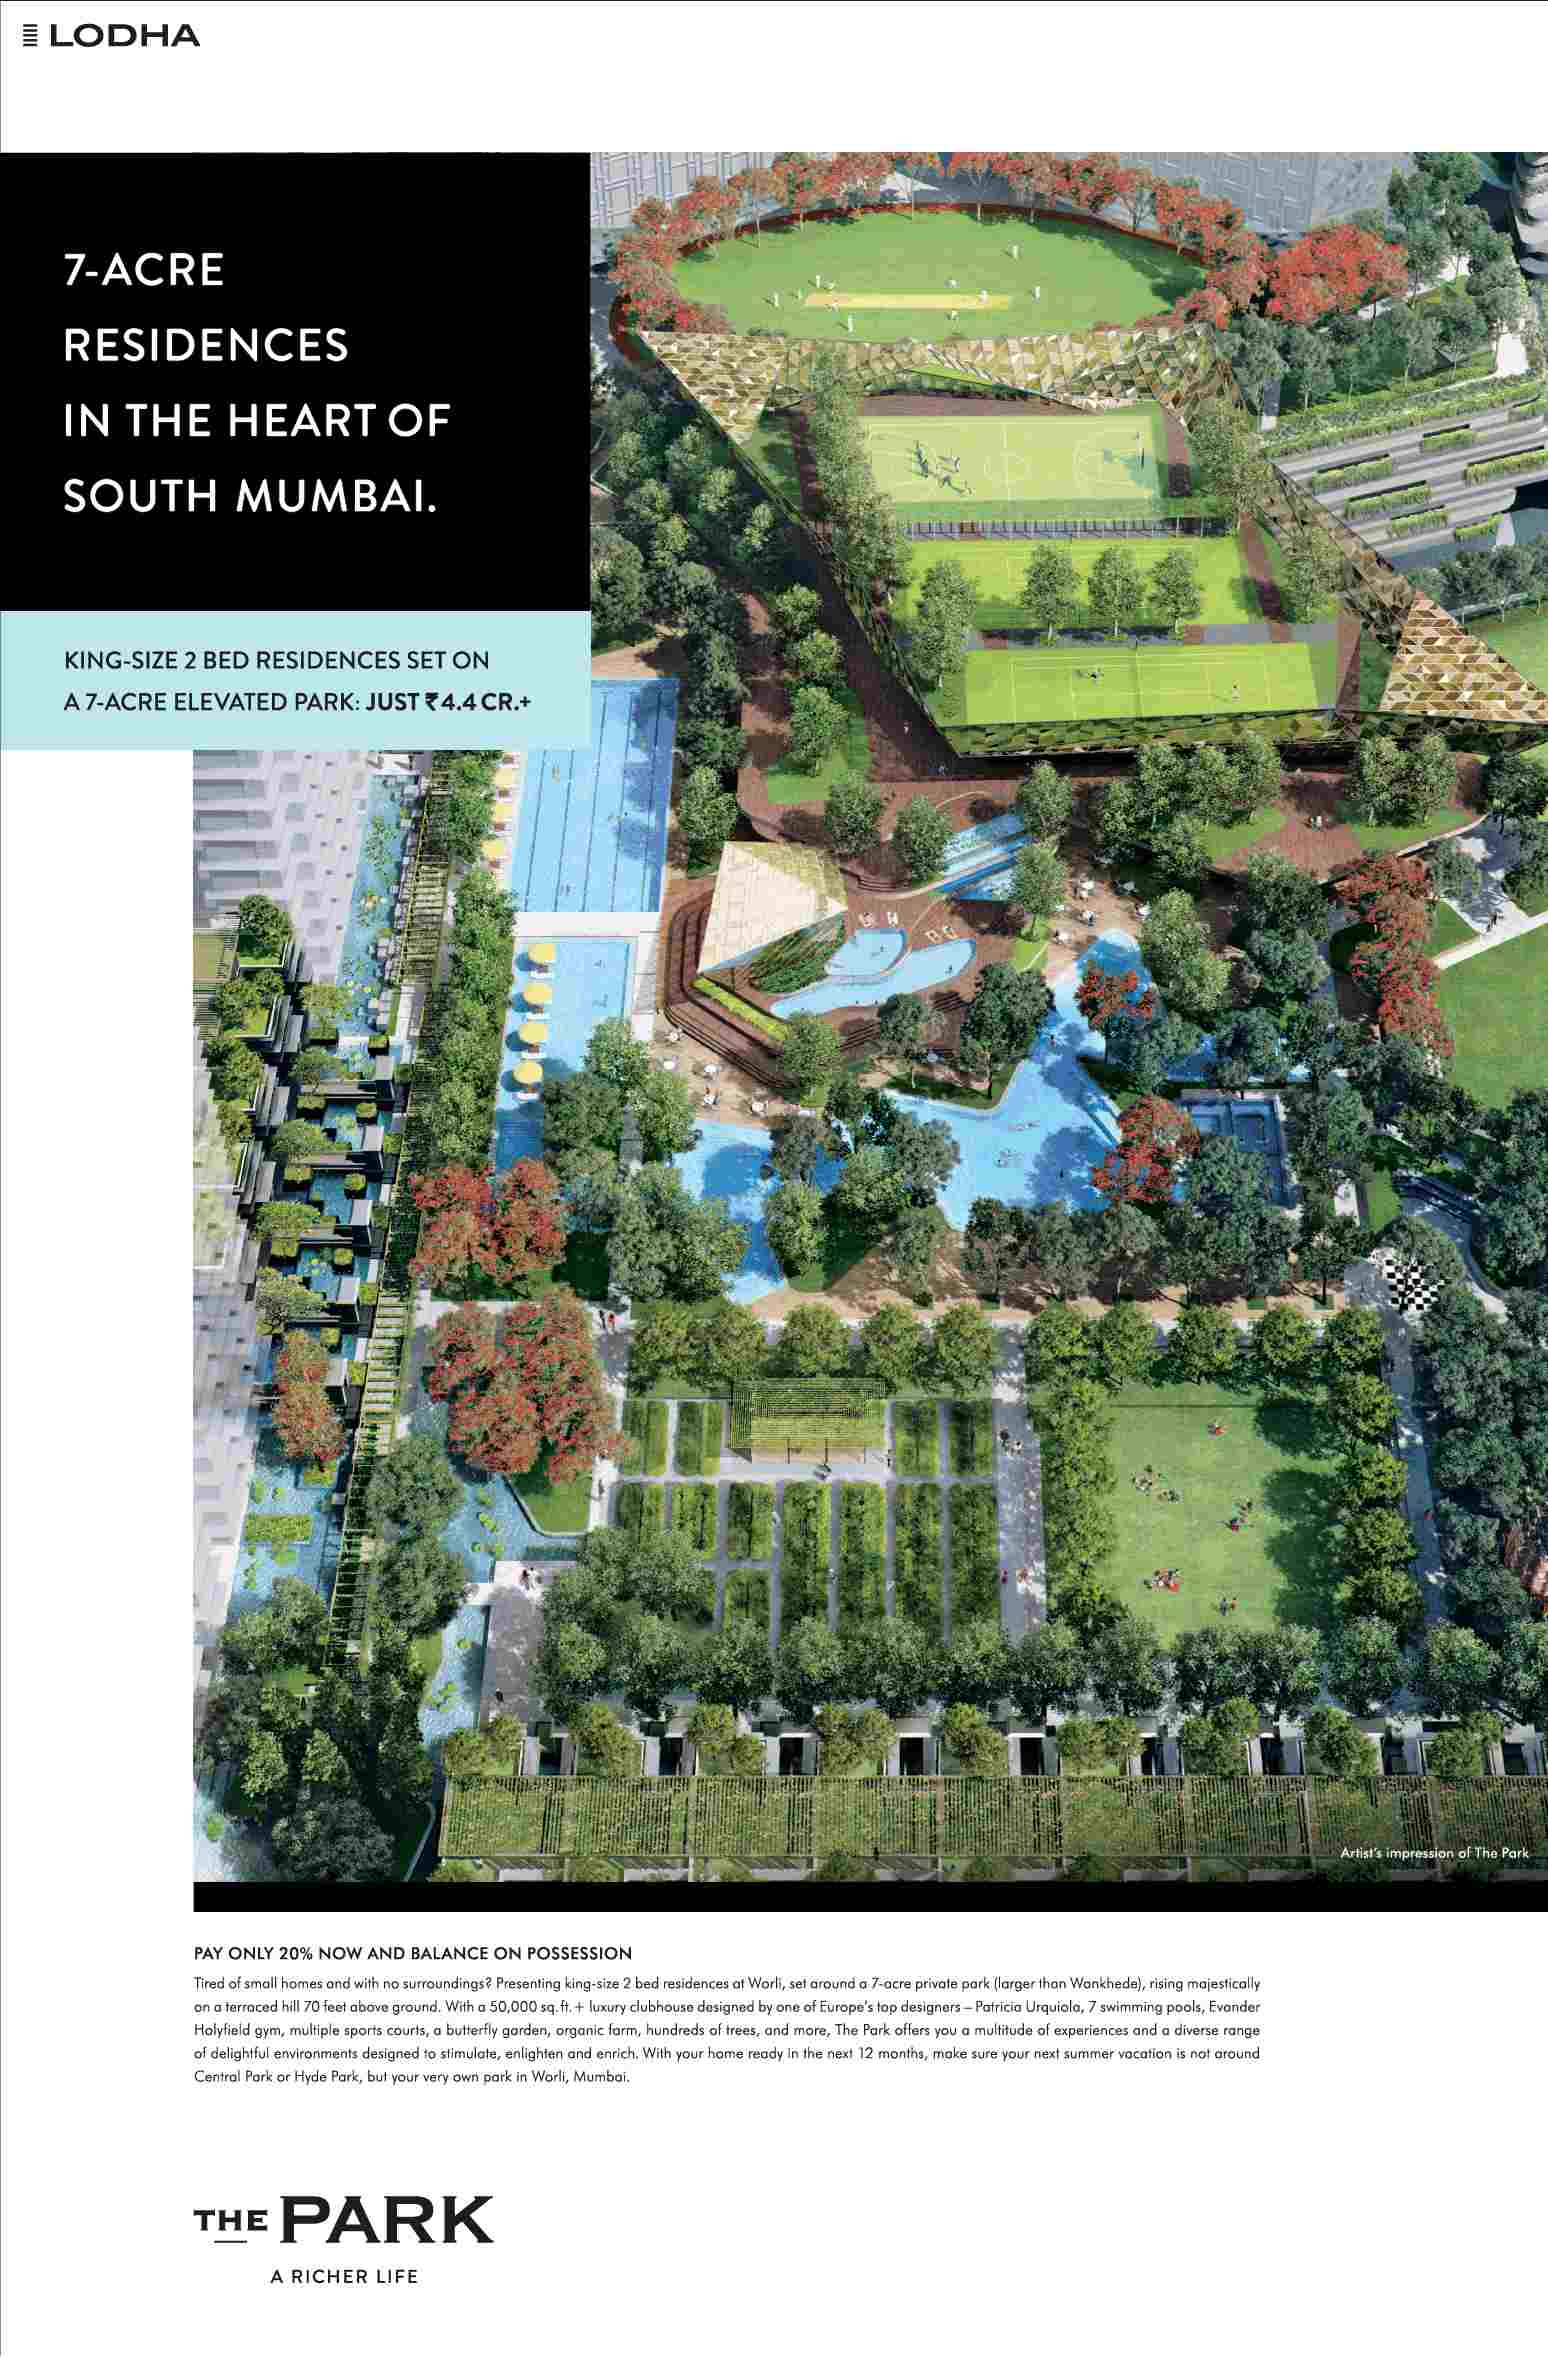 Pay only 20% now and balance on possession at Lodha The Park in Mumbai